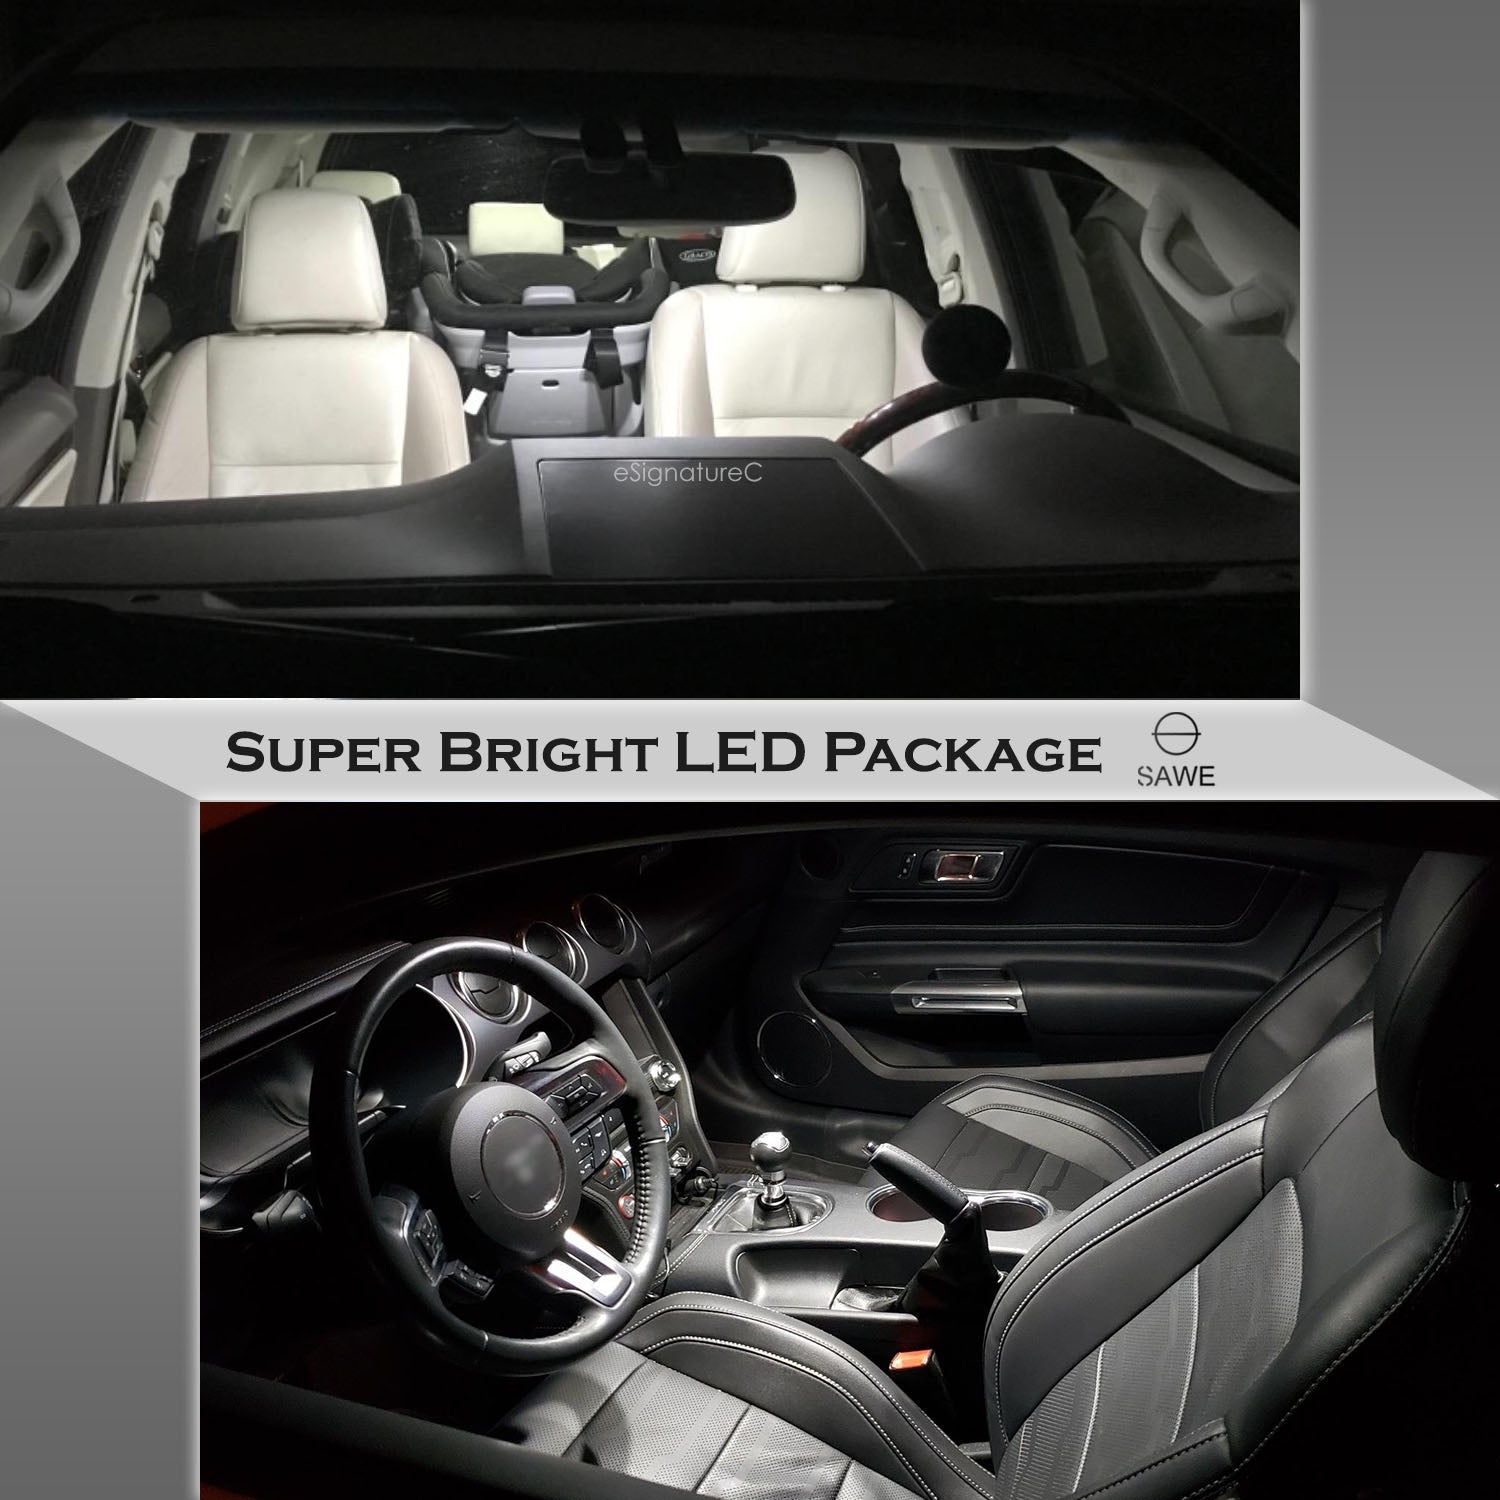 For Kia Rio Interior LED Lights - Dome & Map Light Bulbs Package Kit for 2012 - 2018 - White